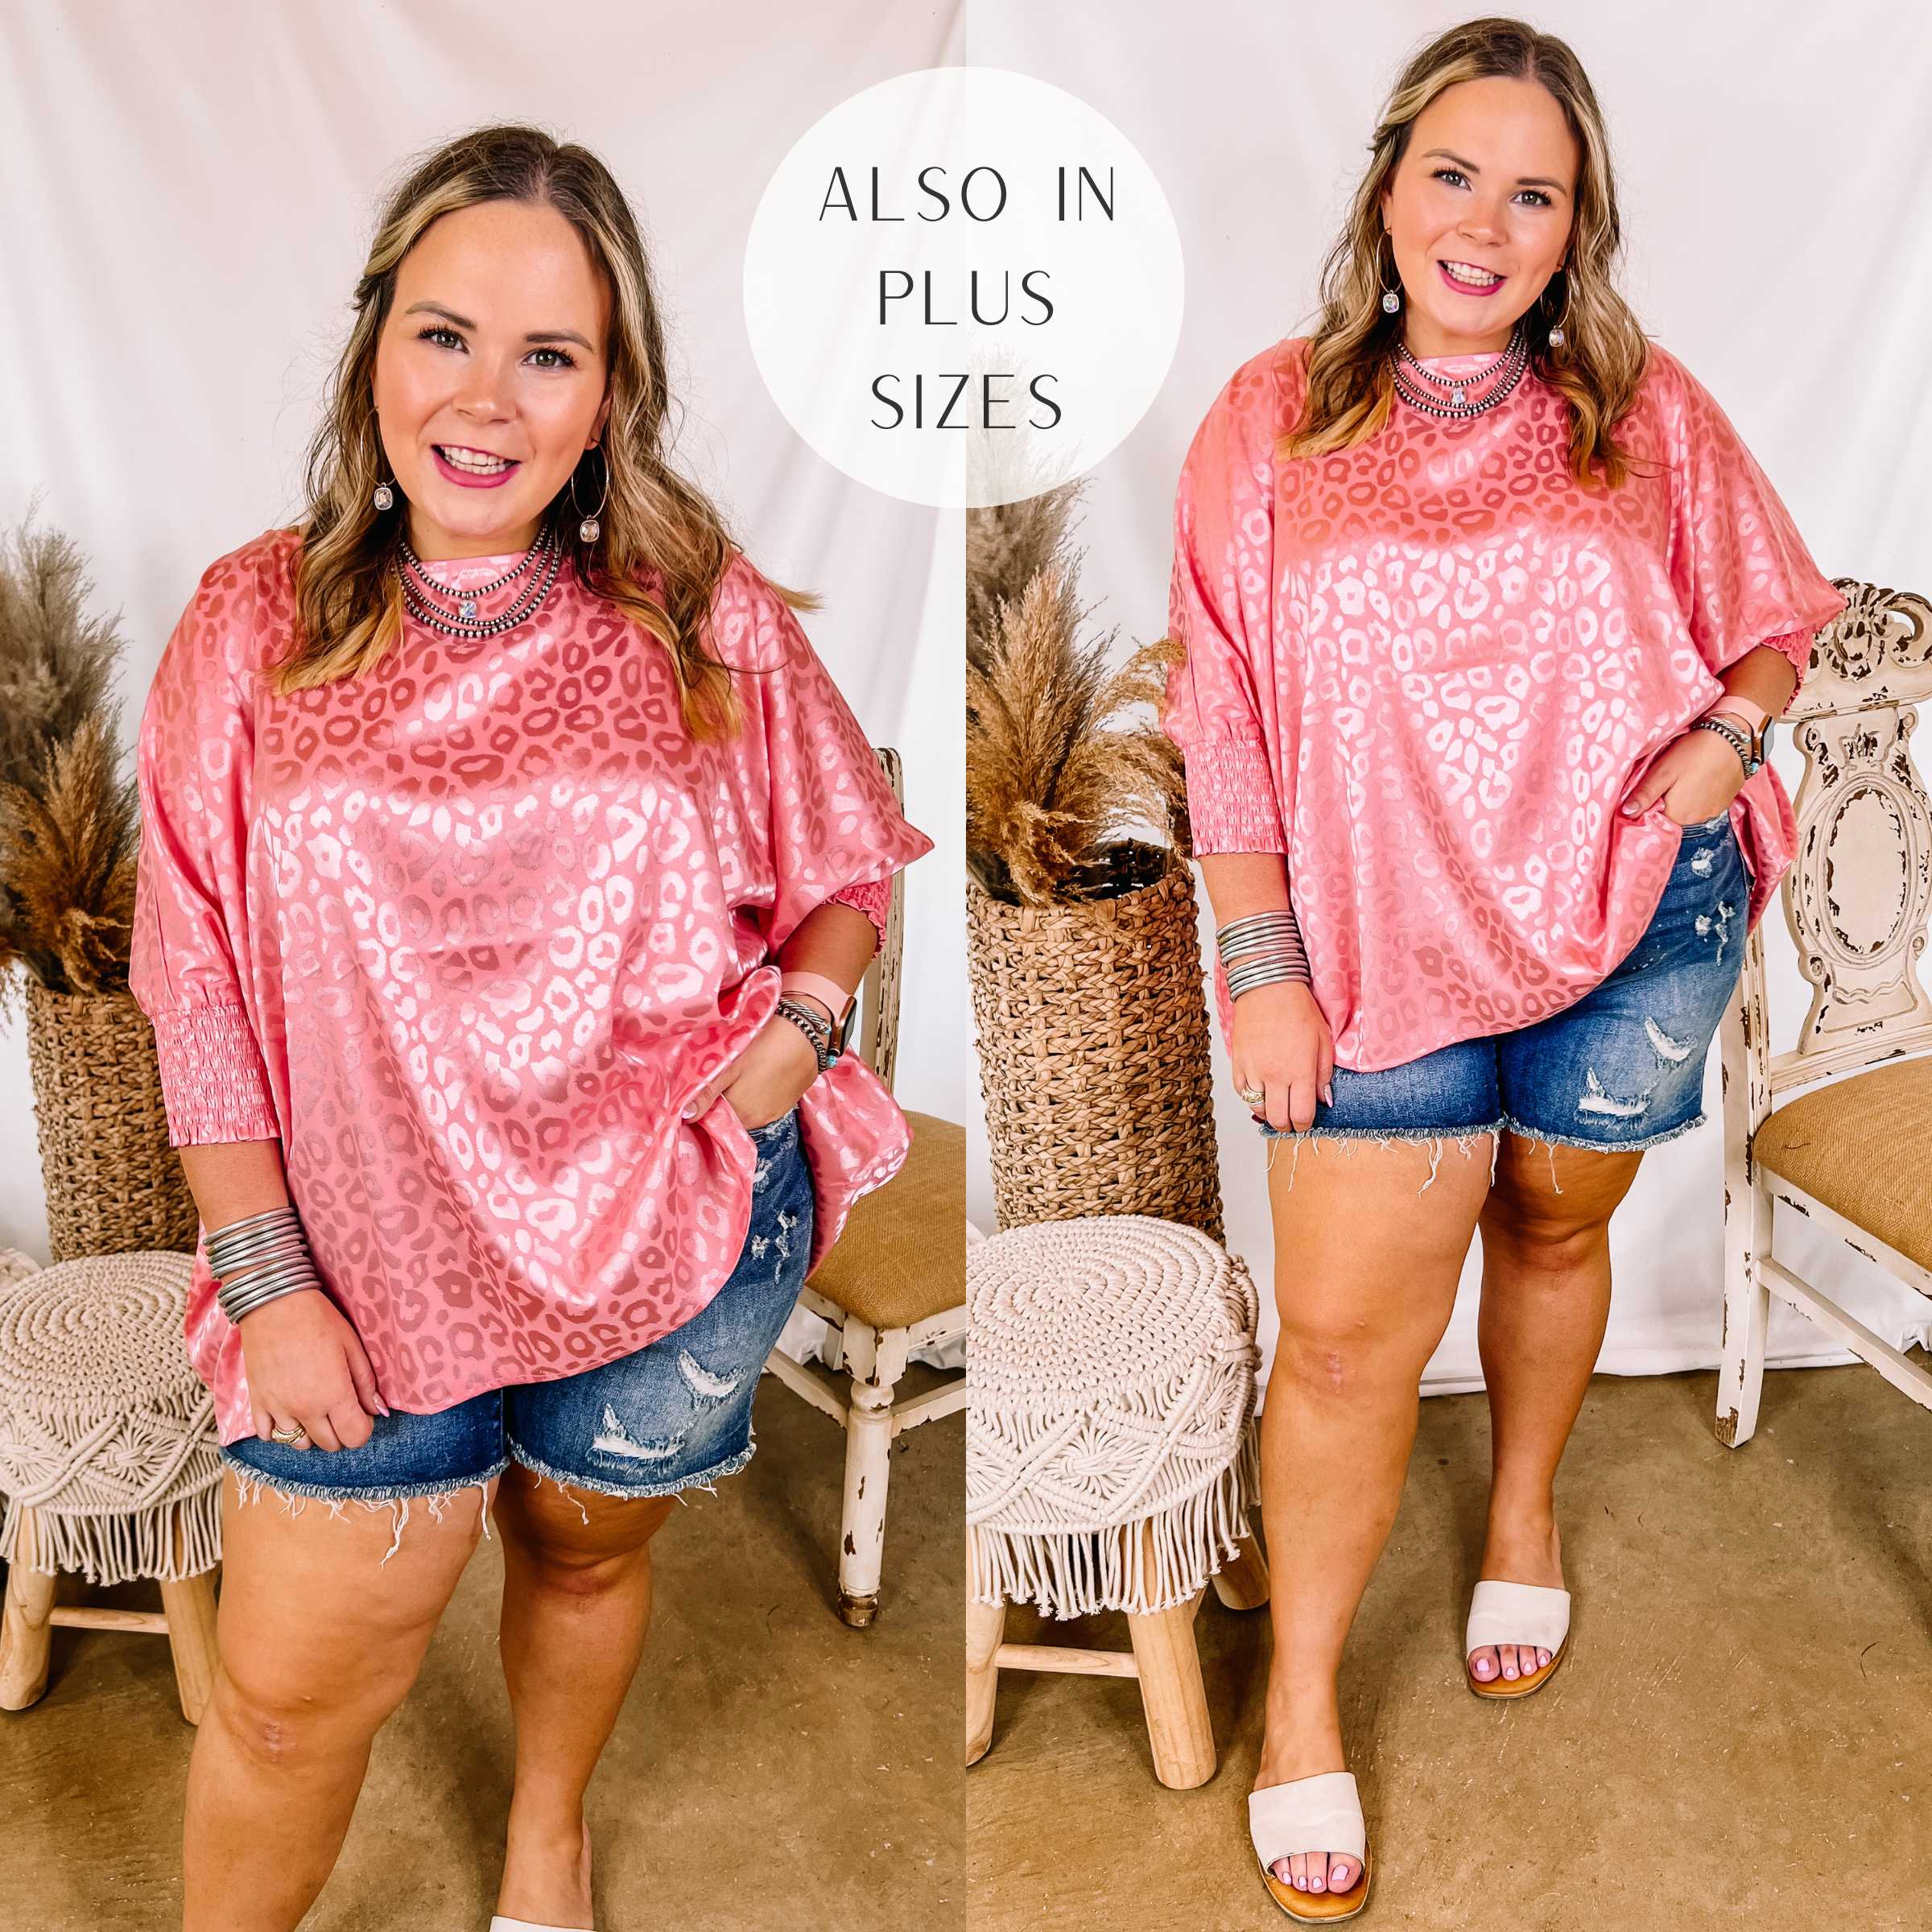 Model is wearing a satin leopard print top that is pink. Model has this oversized top paired with distressed denim shorts, white sandals, and silver jewelry.